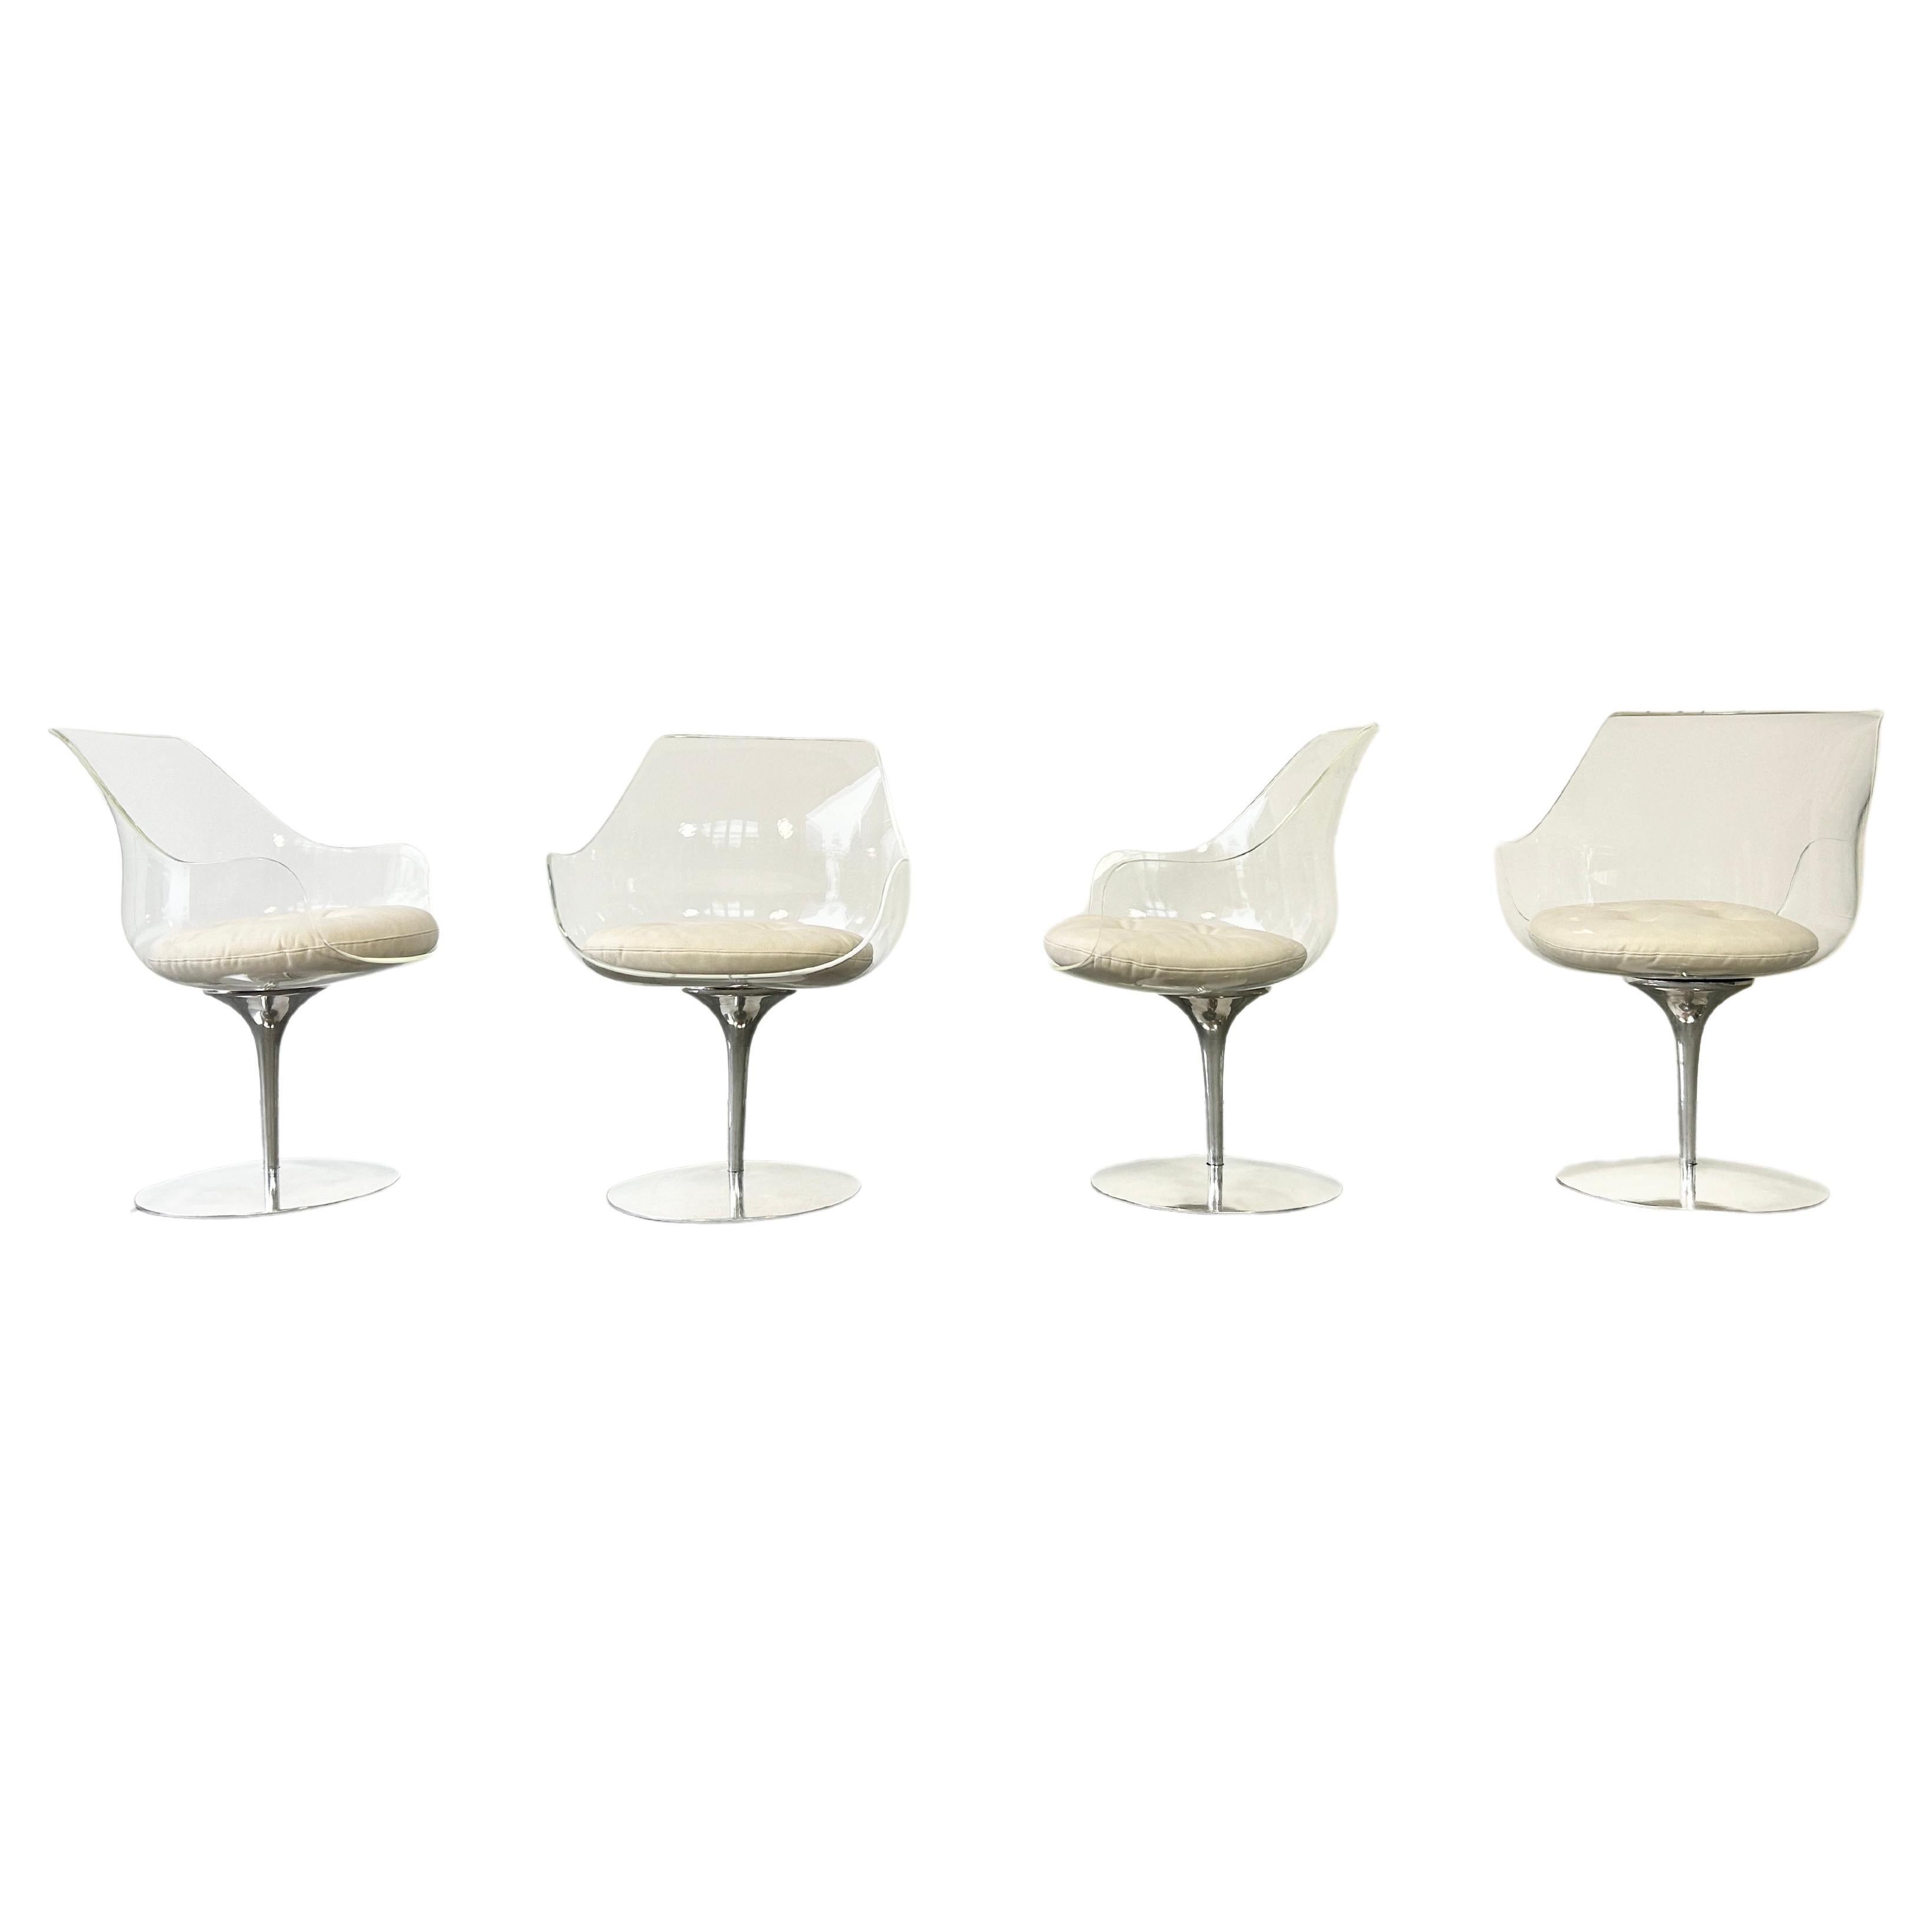 Set of four Champagne chairs by Estelle & Erwine Laverne for Formes Nouvelles